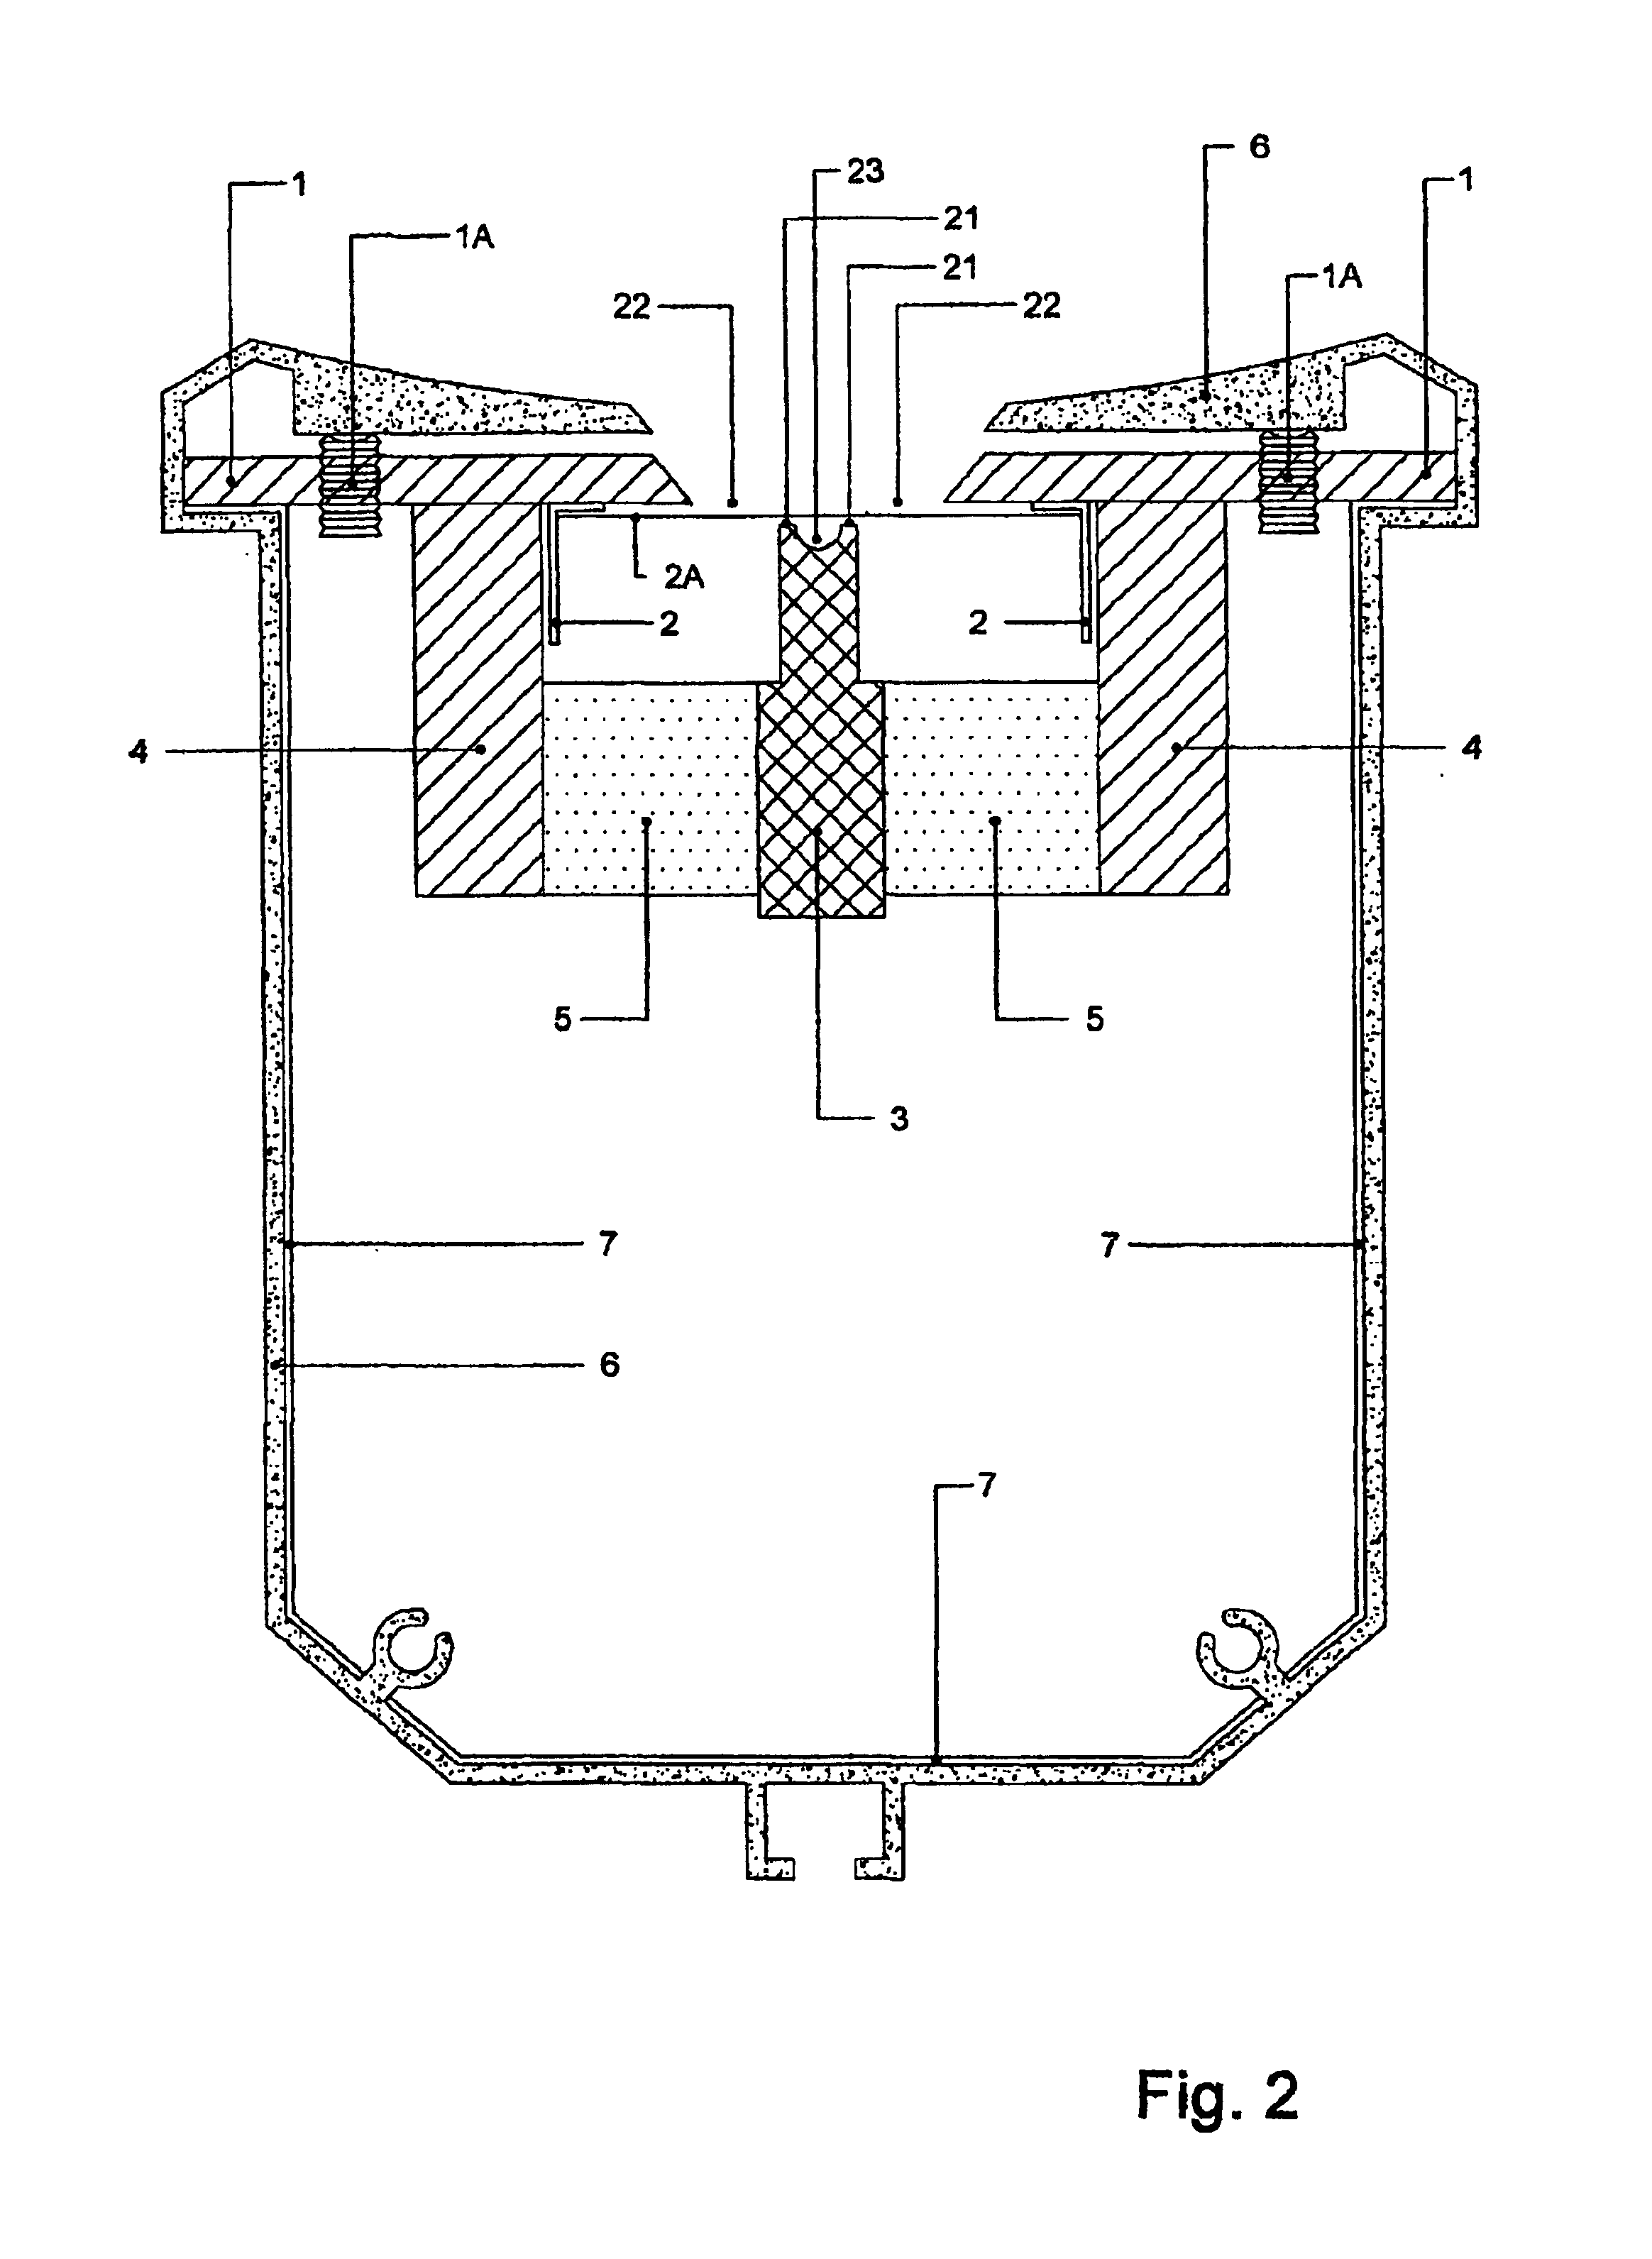 Electroacoustic transducer with field replaceable diaphragm carrying two interlaced coils, without manipulating any wires